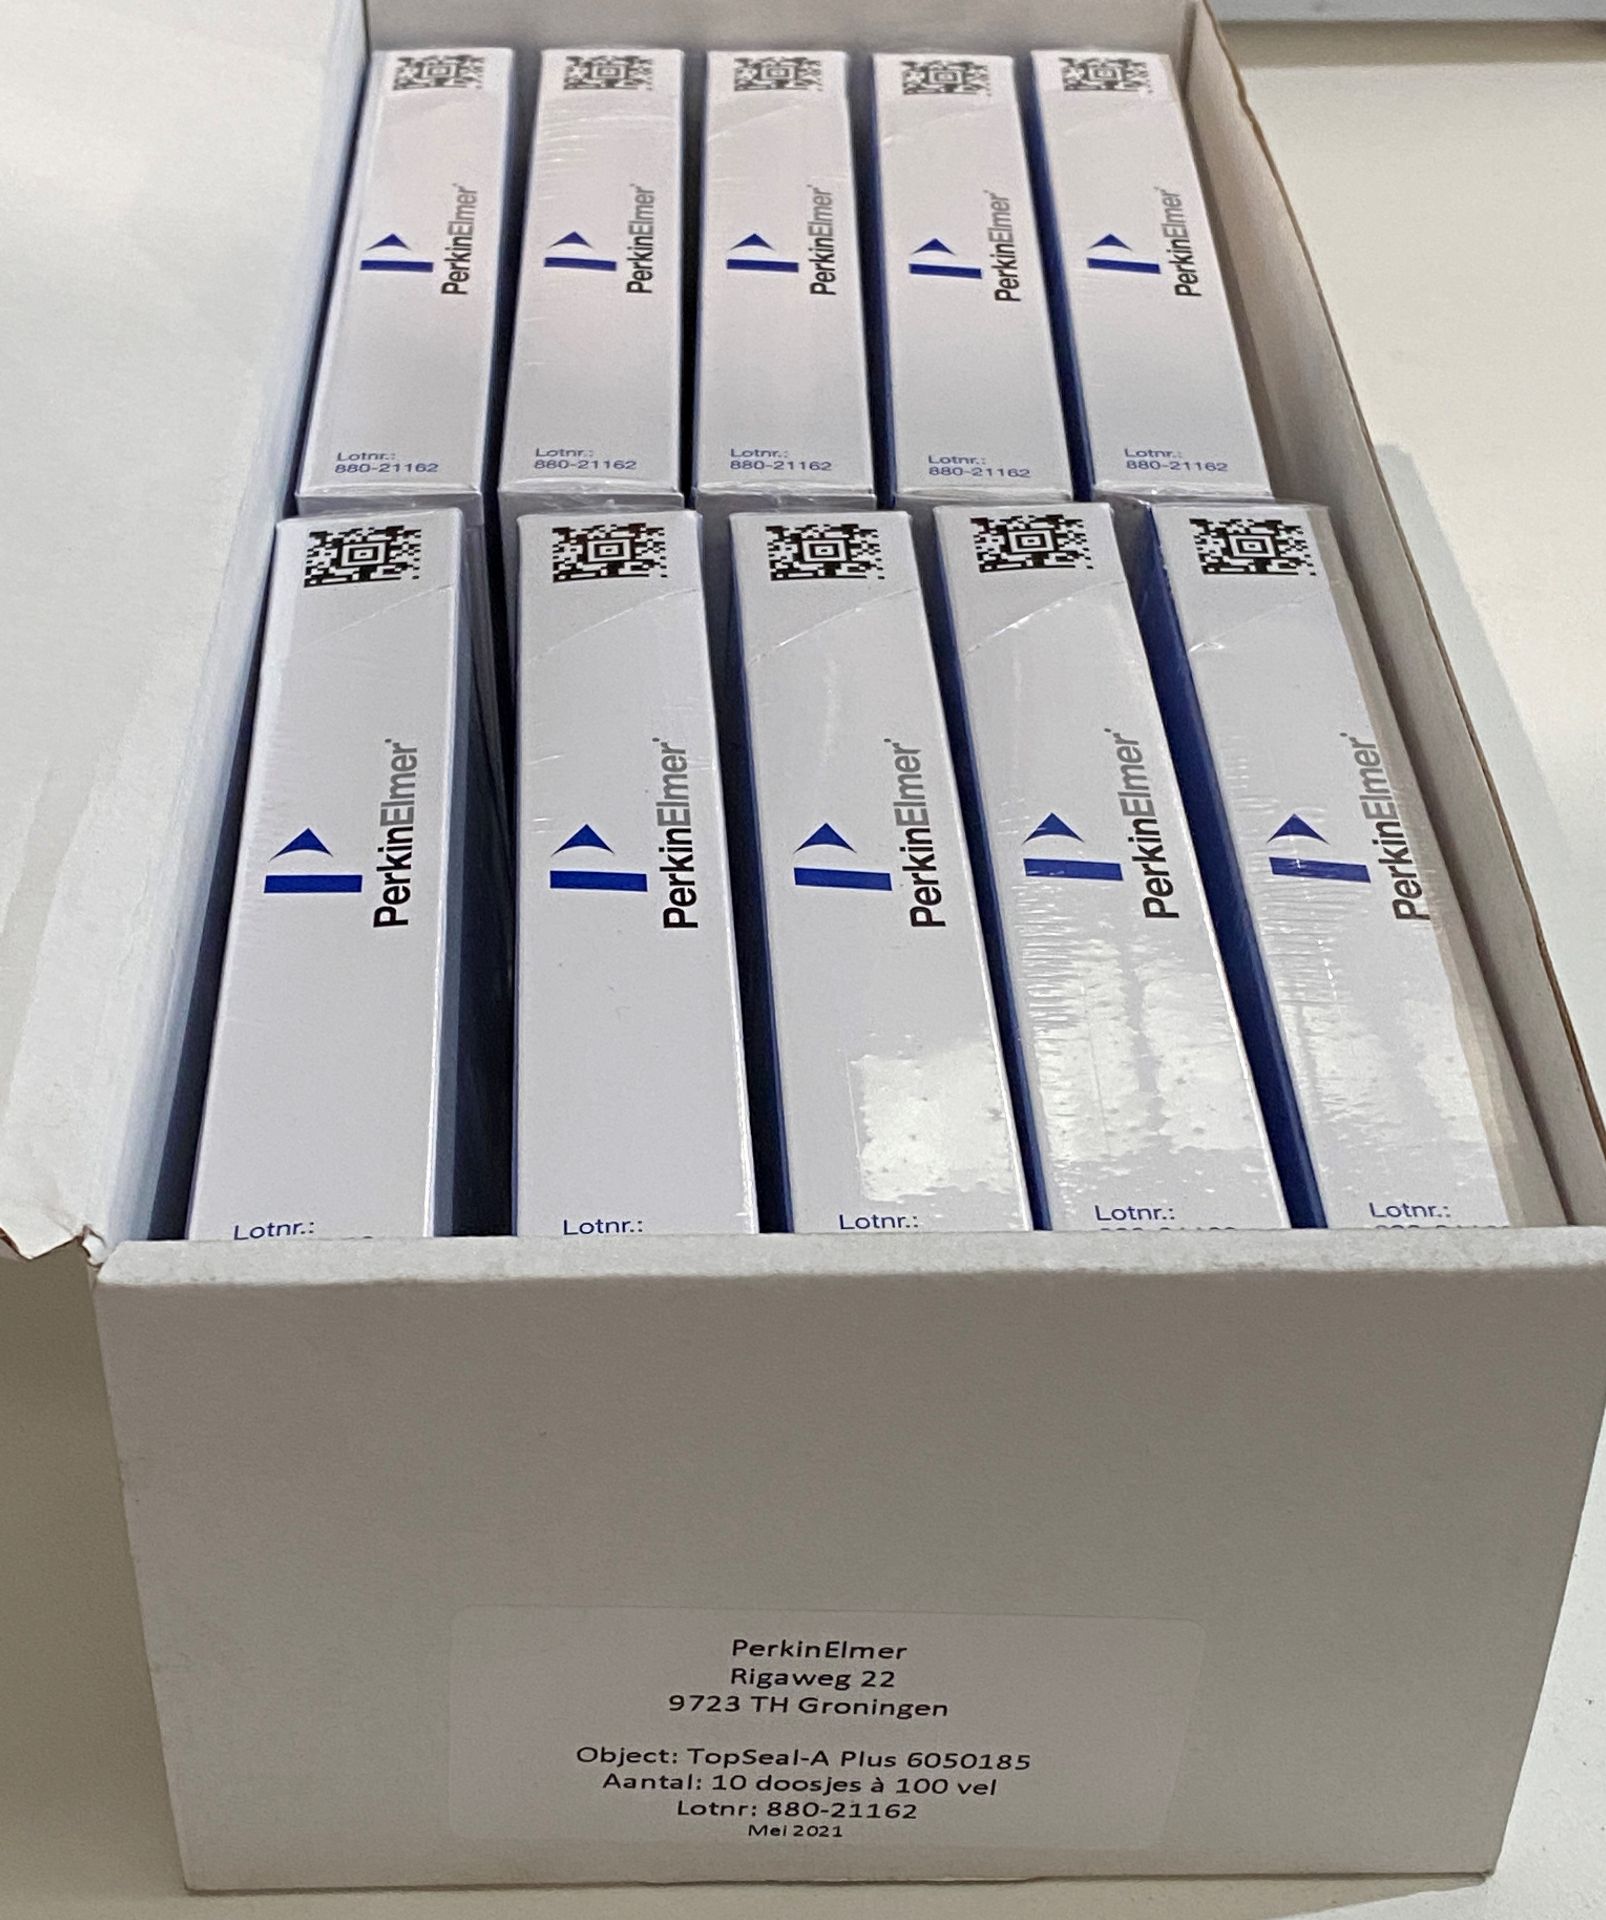 200 x Packs of PerkinElmer Top Seal - A Plus 6050185 clear adhesive microplate seals - 100 units - Image 3 of 5